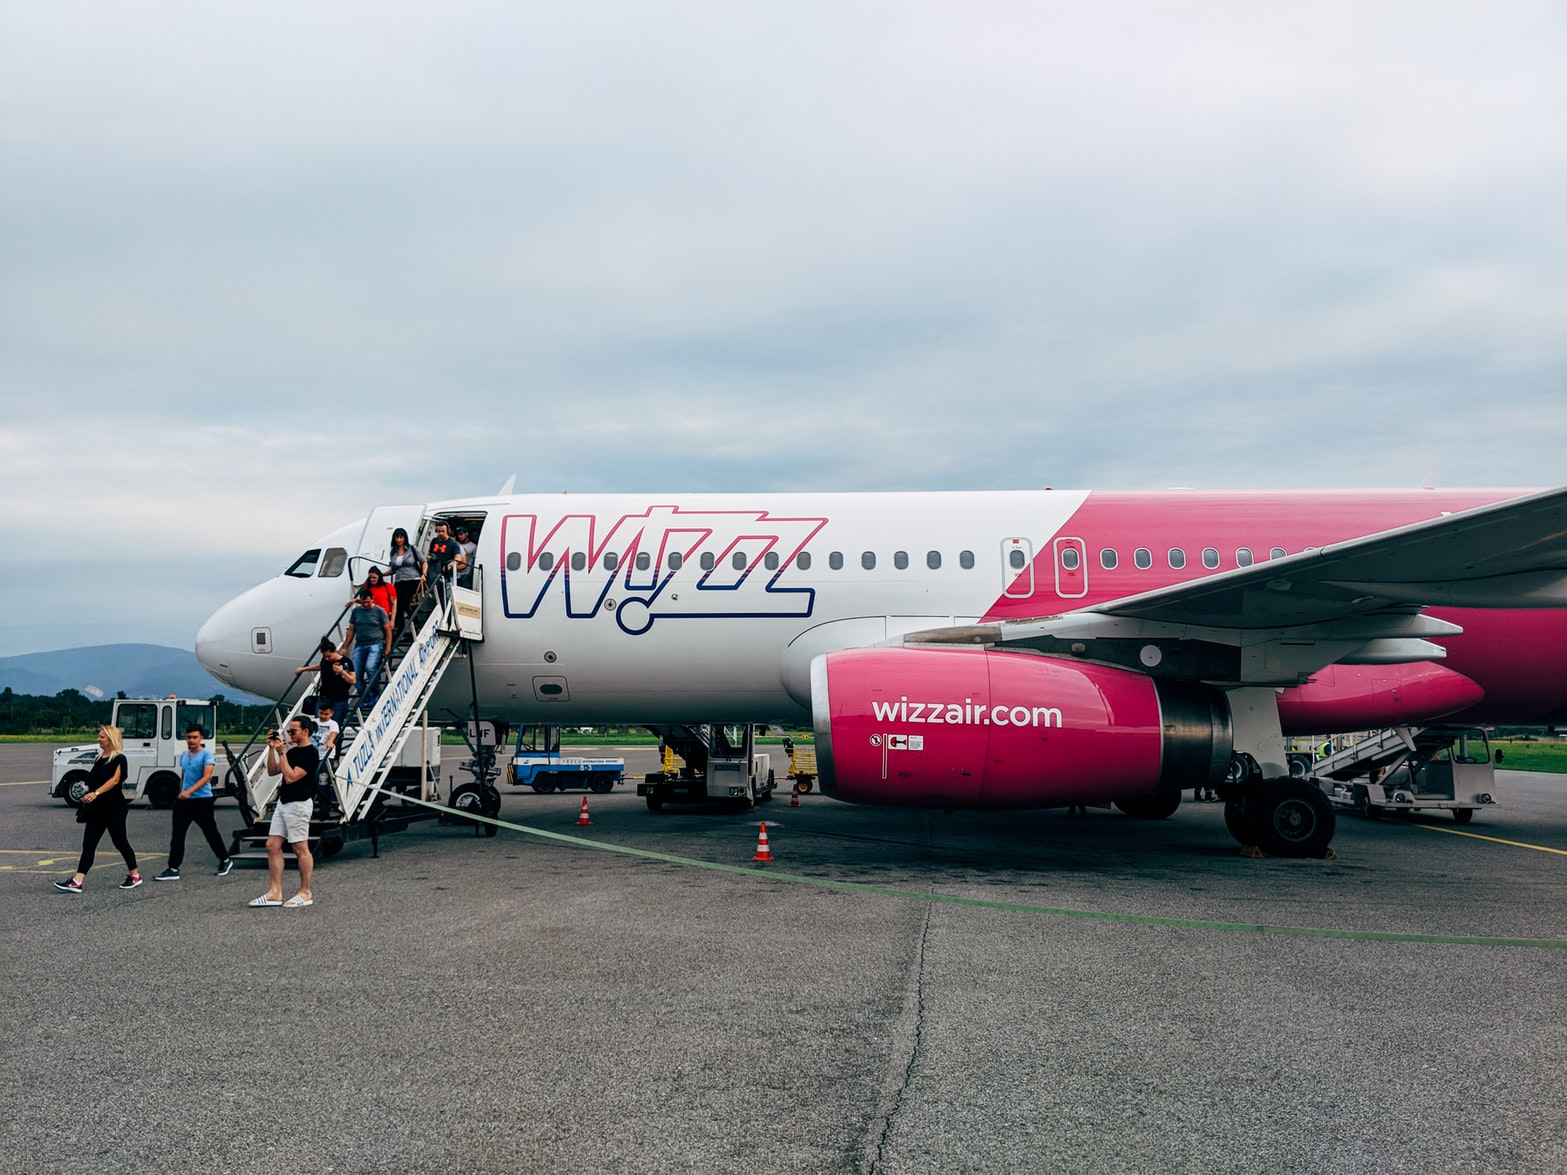 Wizz Air Suspends Flights To Odessa For Security Reasons, Closes Other Routes